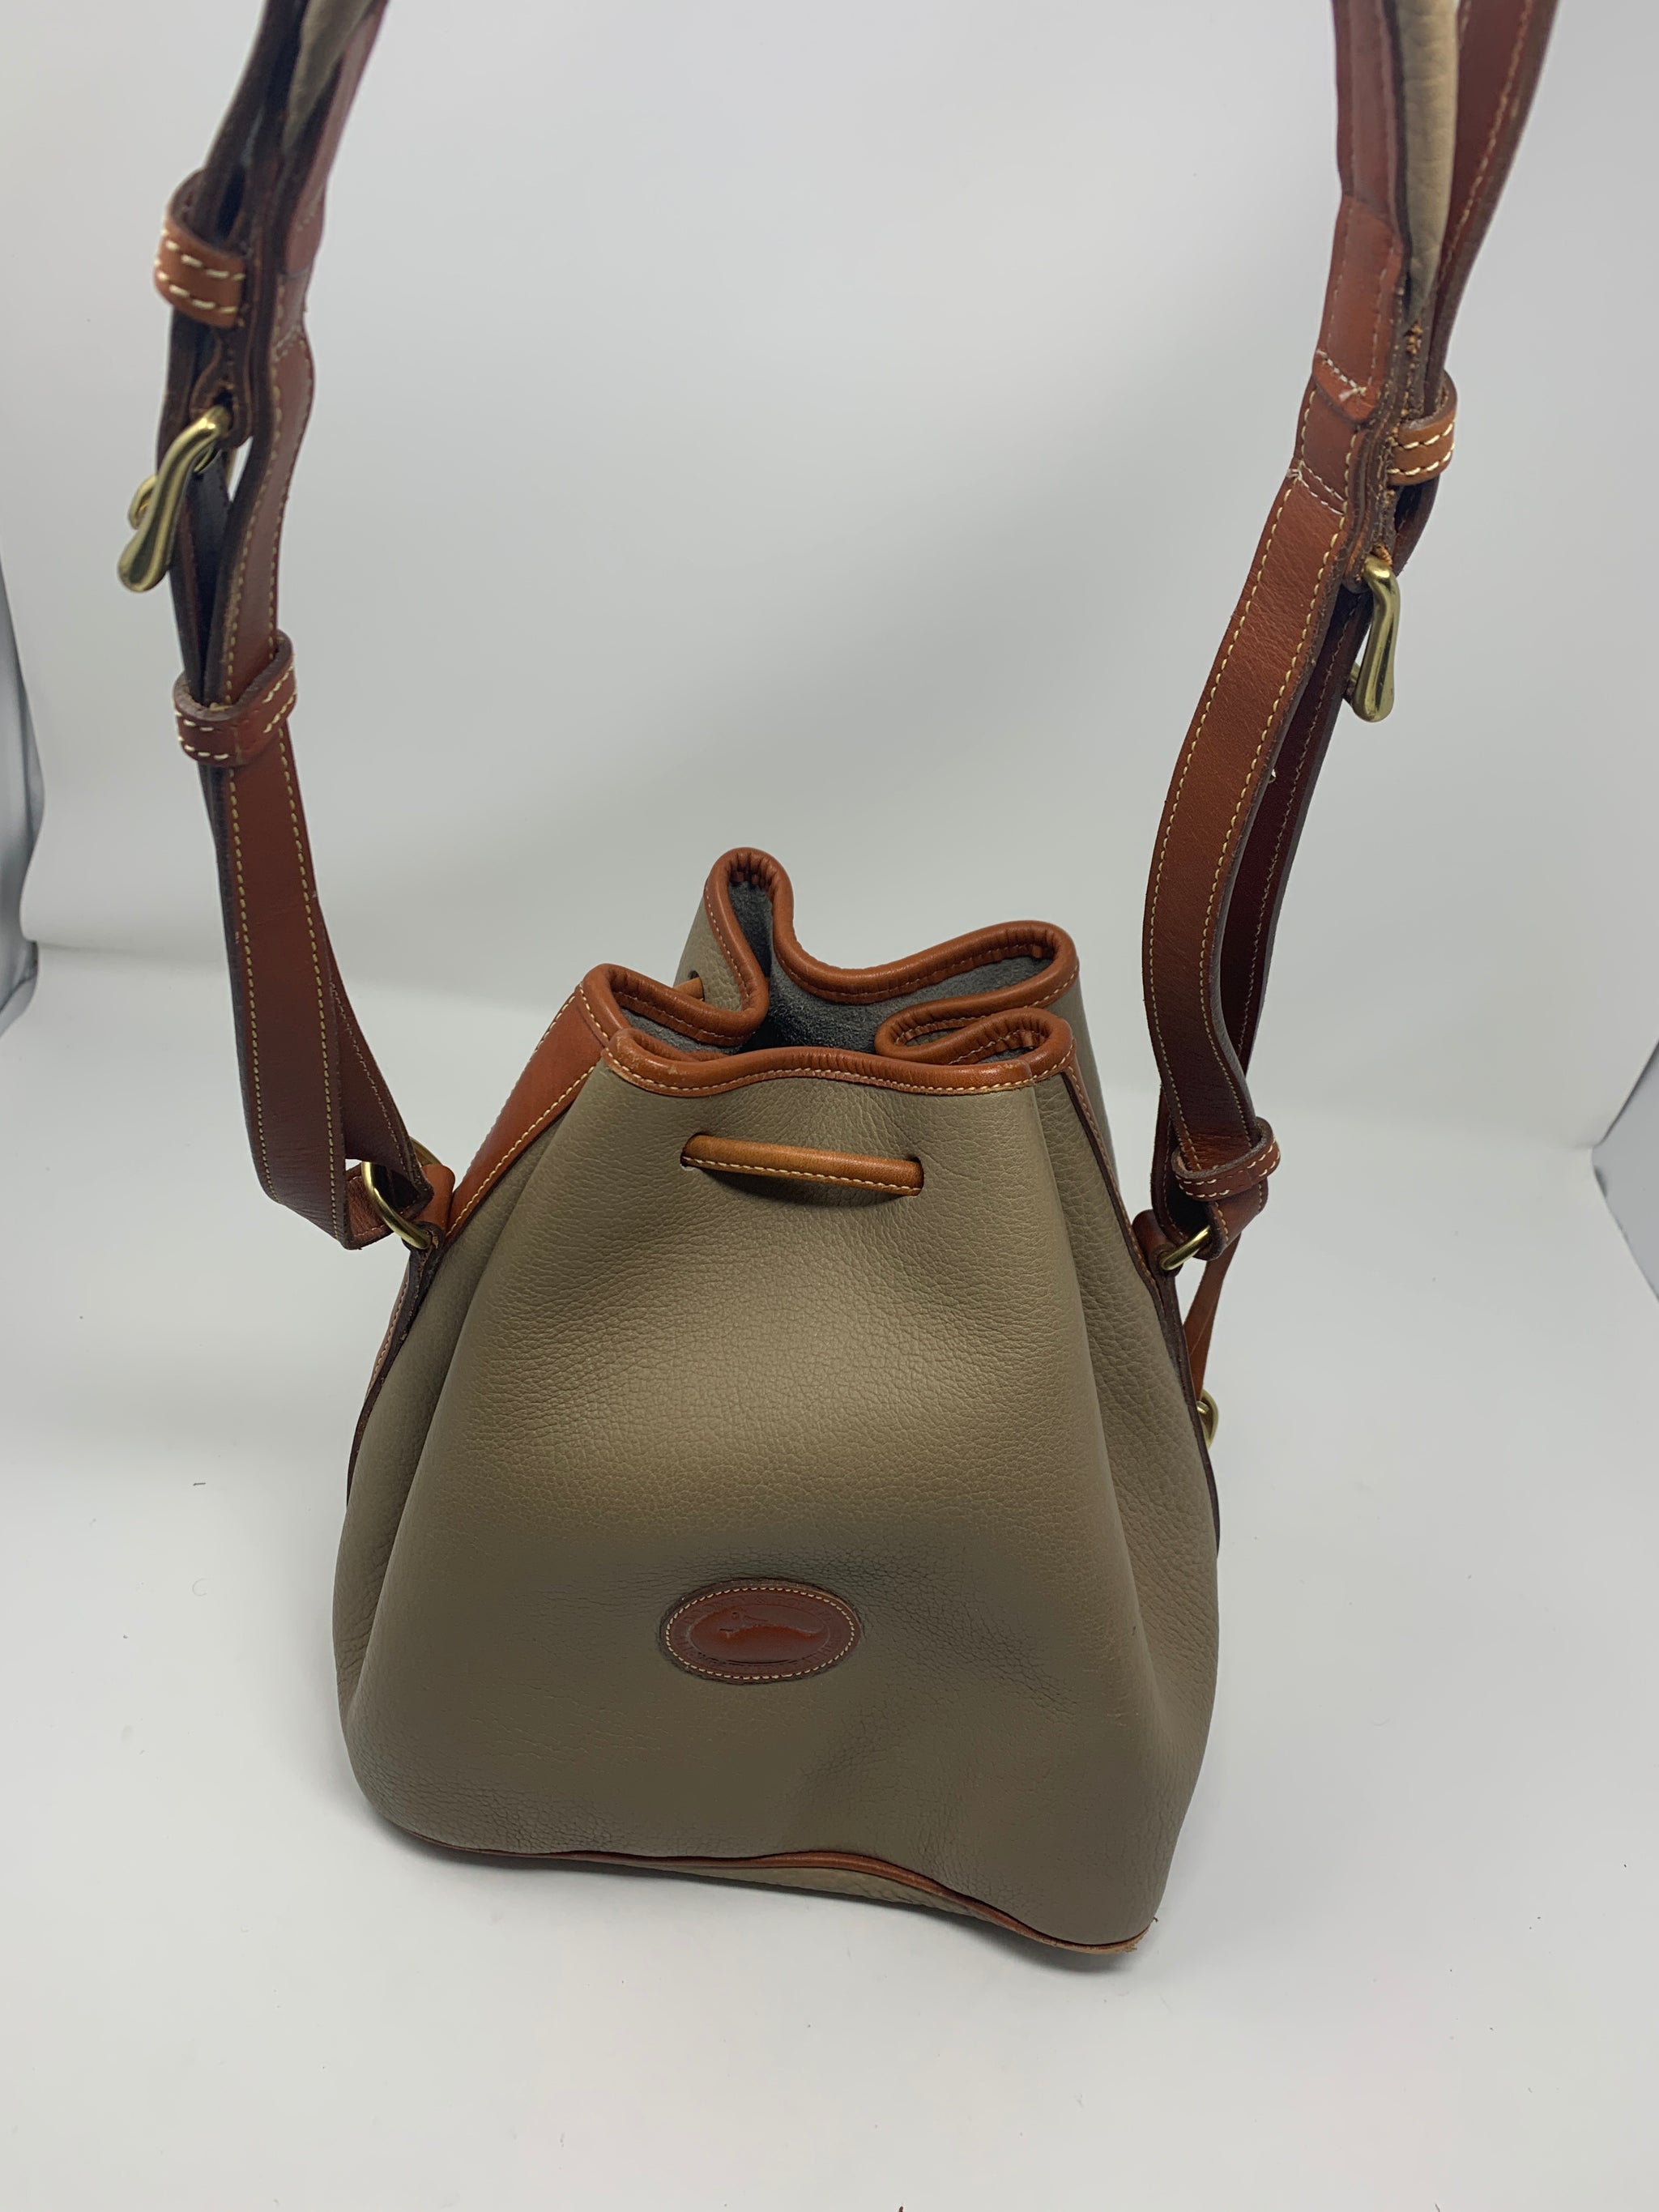 Shop by STYLES of Vintage Dooney and Bourke Handbags